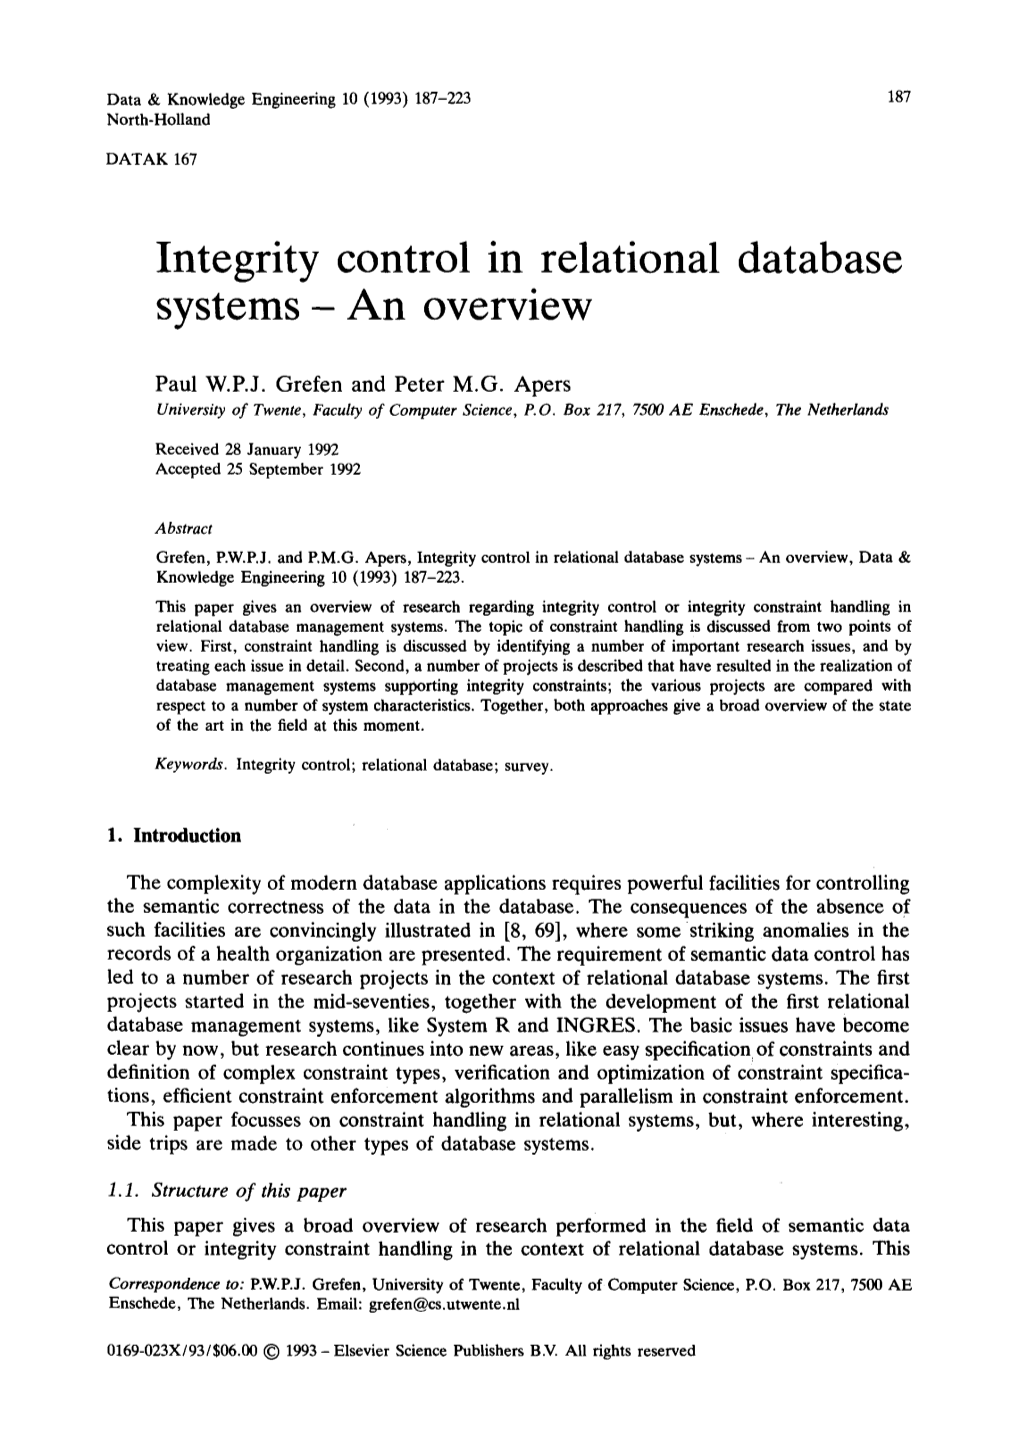 Integrity Control in Relational Database Systems- an Overview